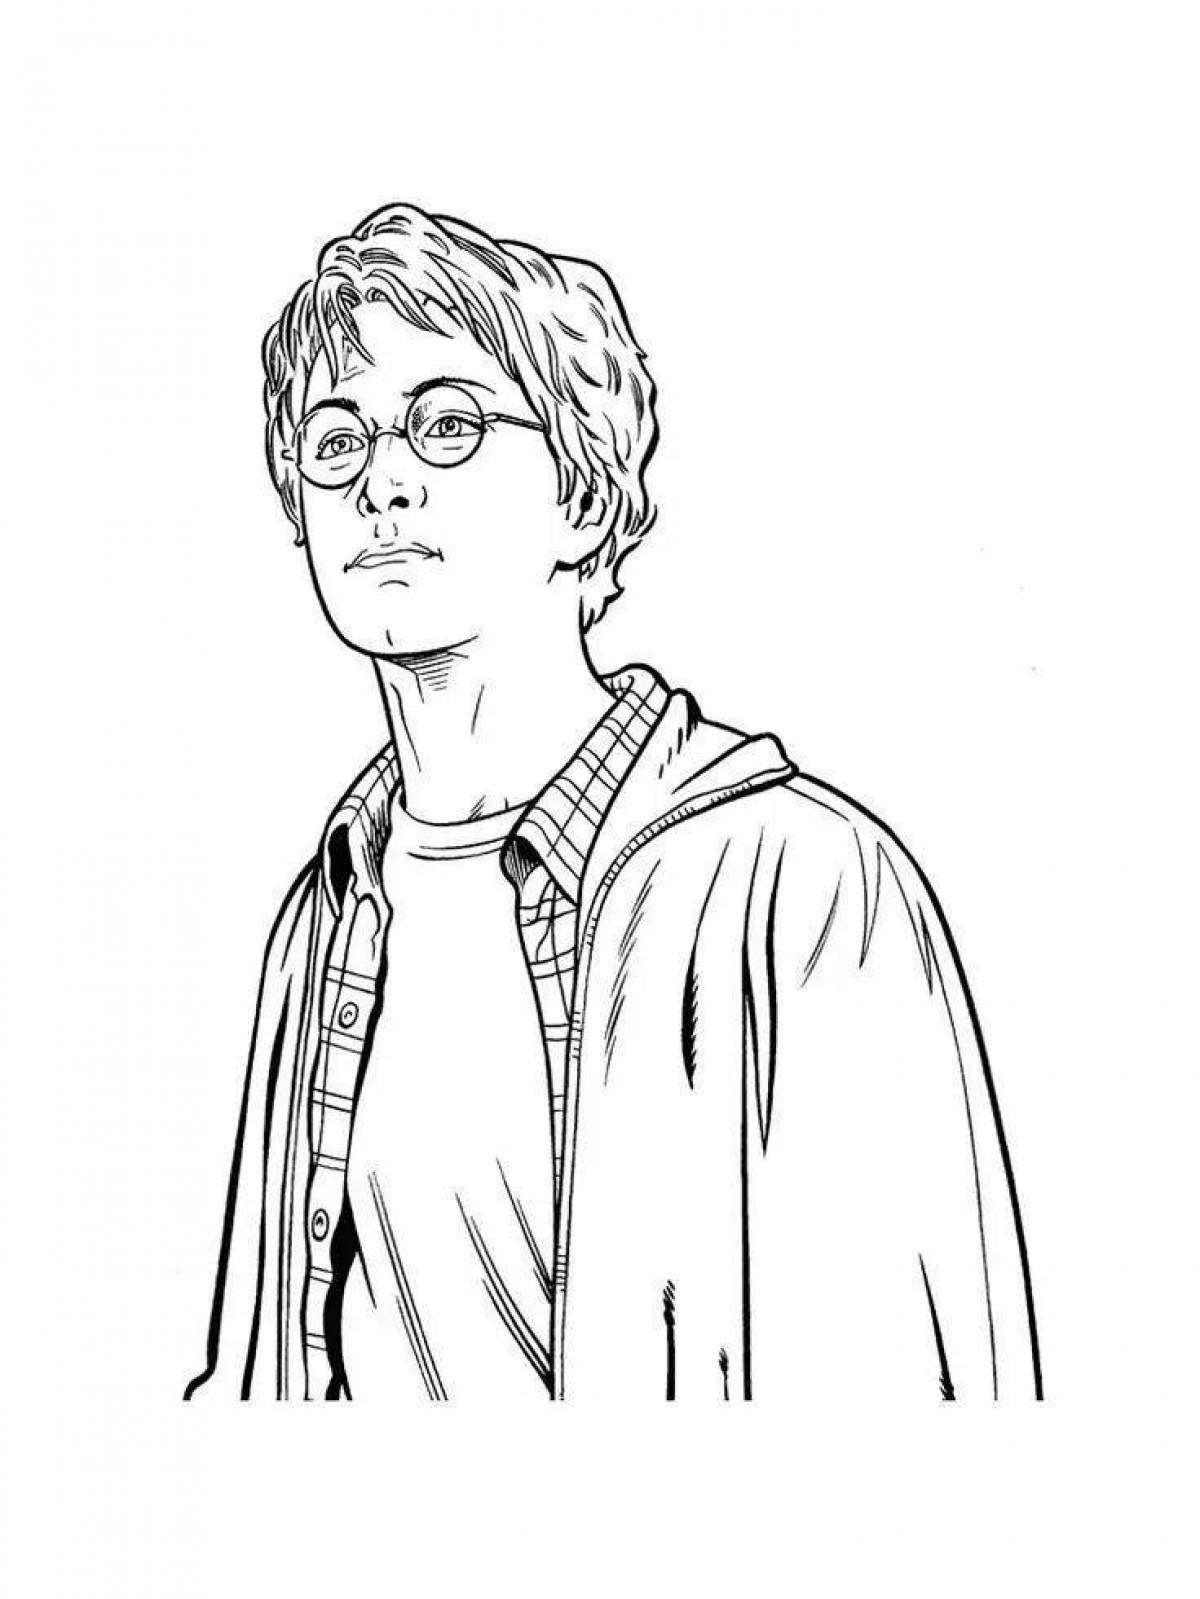 Harry potter creative coloring book